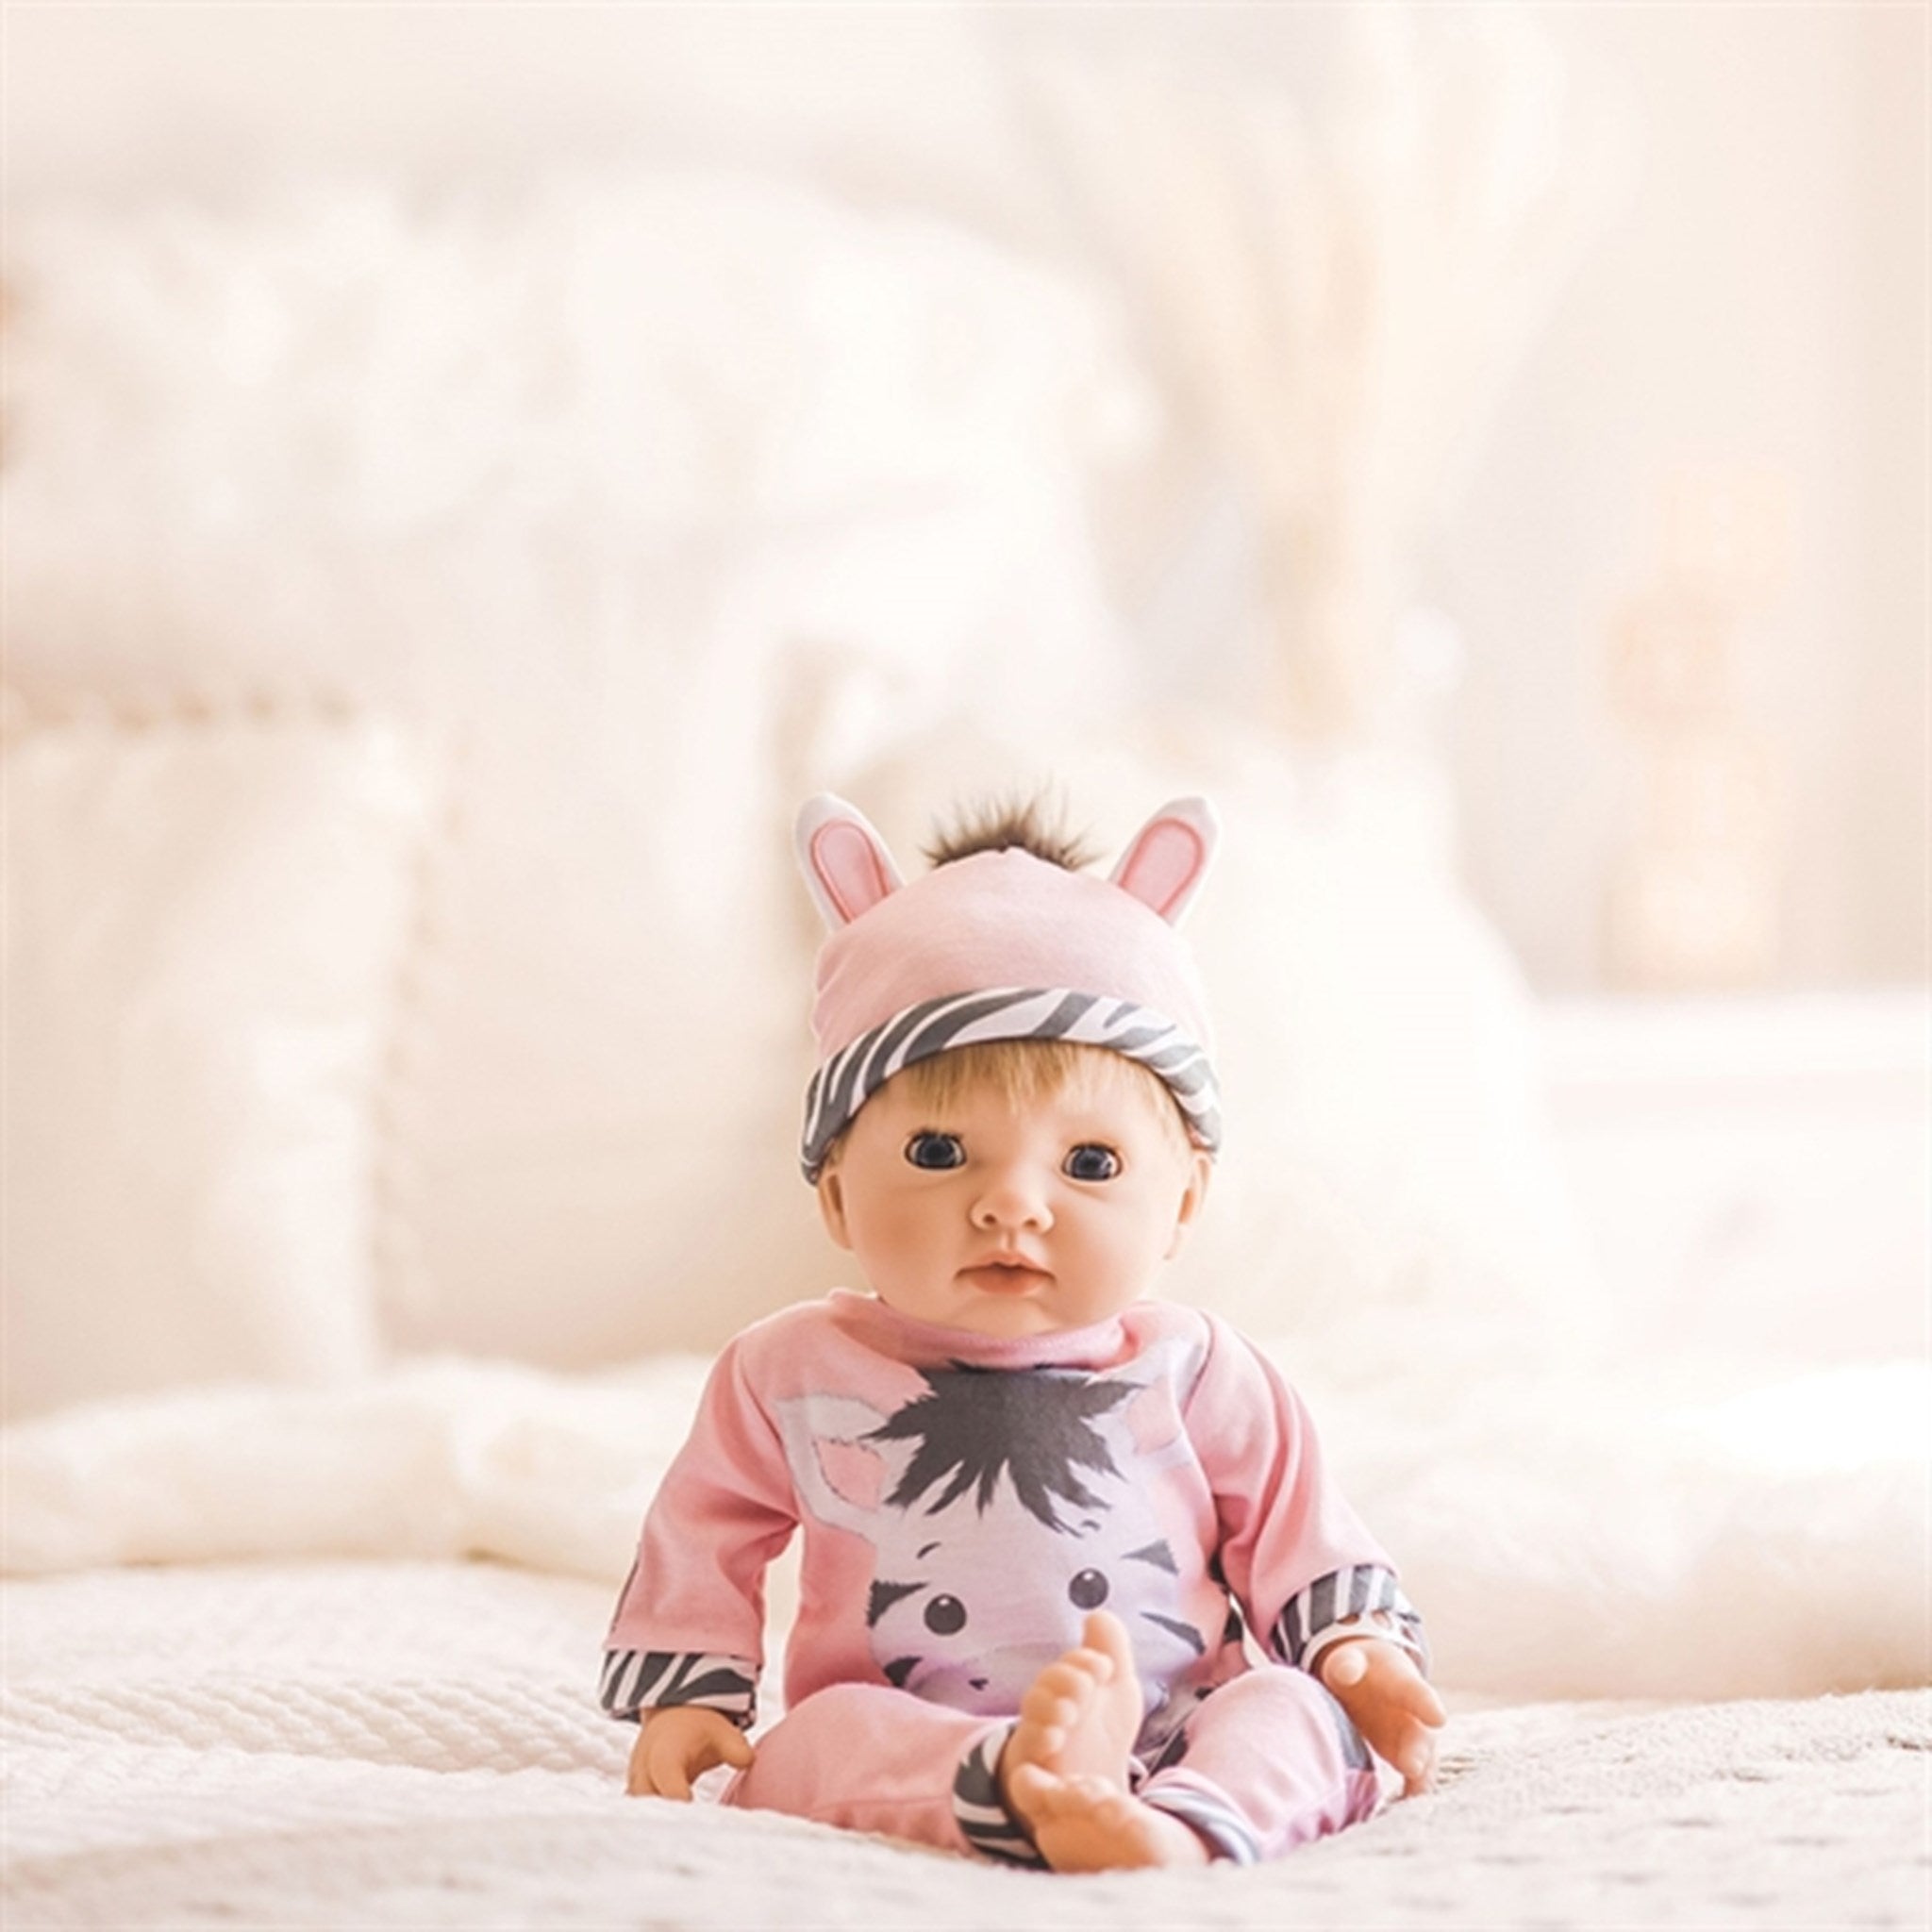 Tiny Treasure Blond Haired Doll Zebra Outfit 3